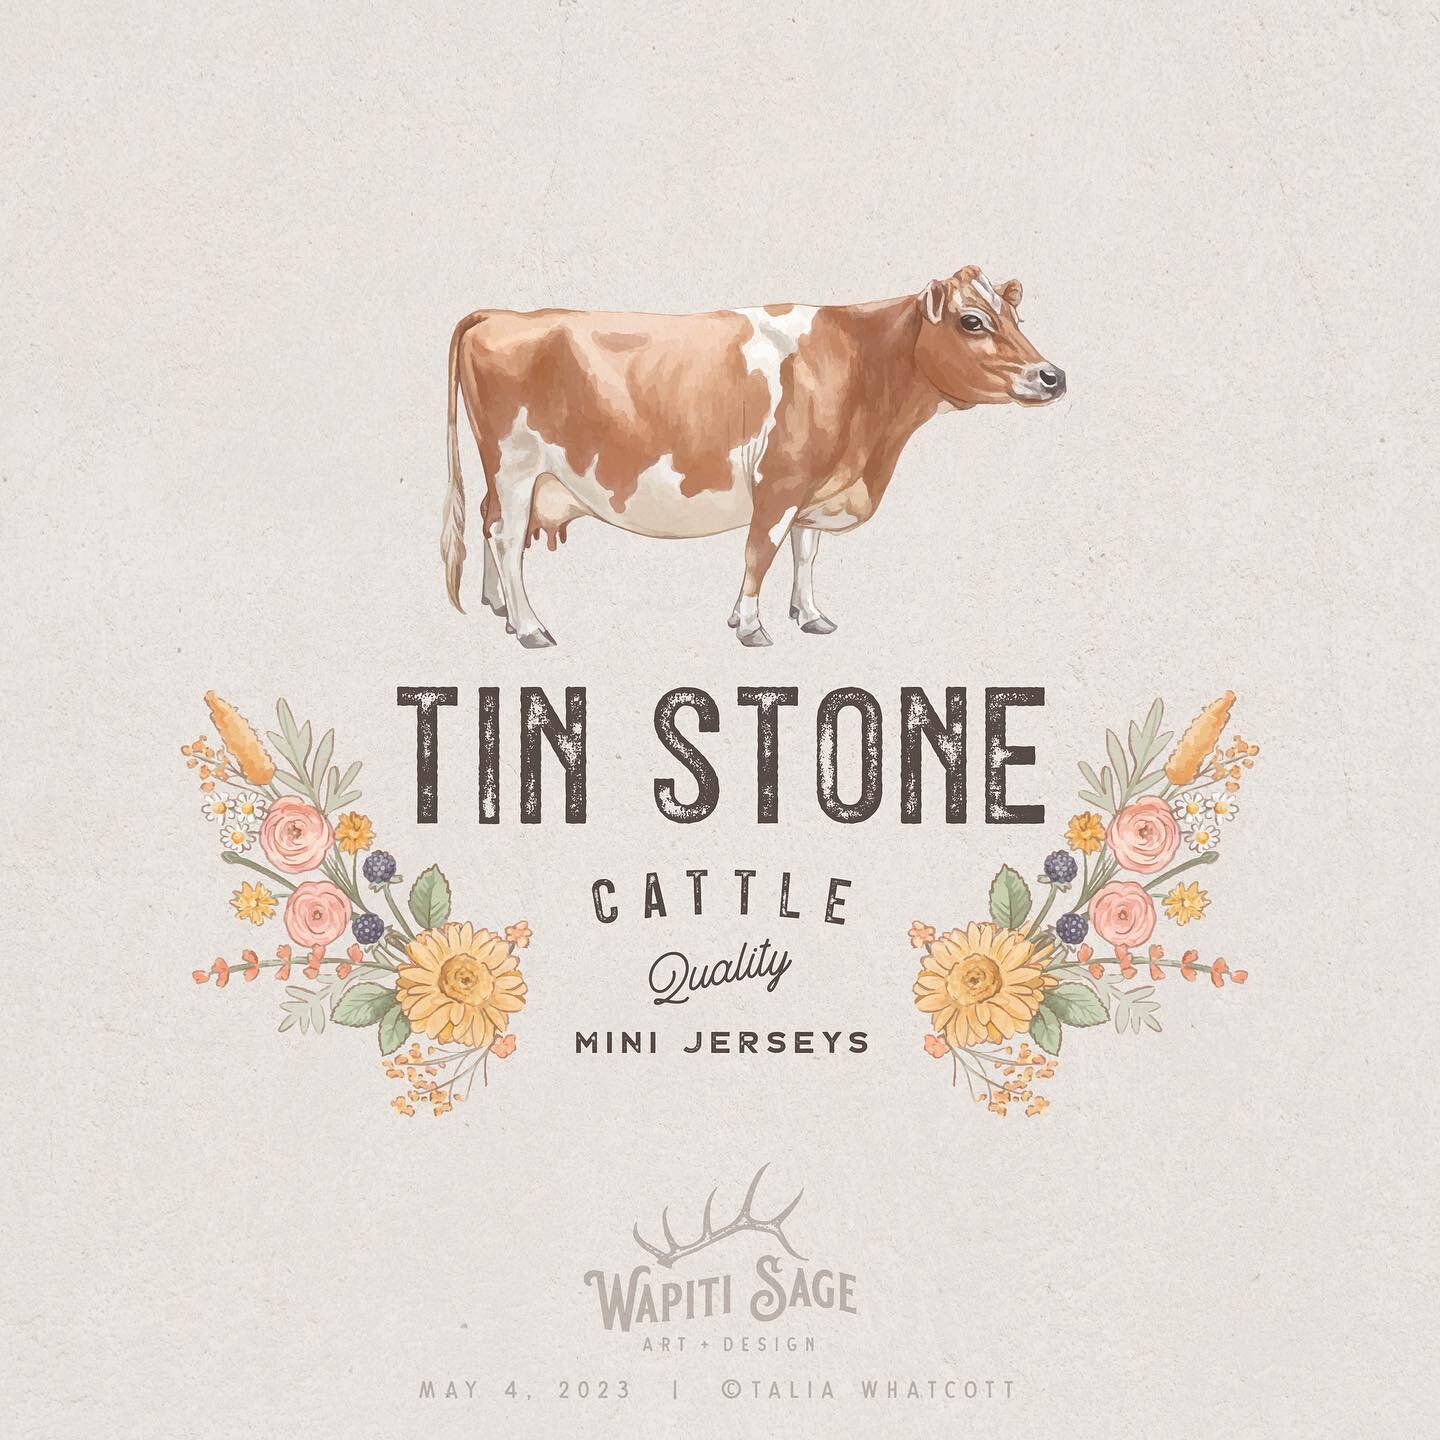 So excited to finally share this branding design I made for @tinstonecattleco! I absolutely loved this set&mdash;it was heavily inspired by wildflowers and, of course, some of the cutest mini Jersey cows! My favorite is the portrait logo of this swee